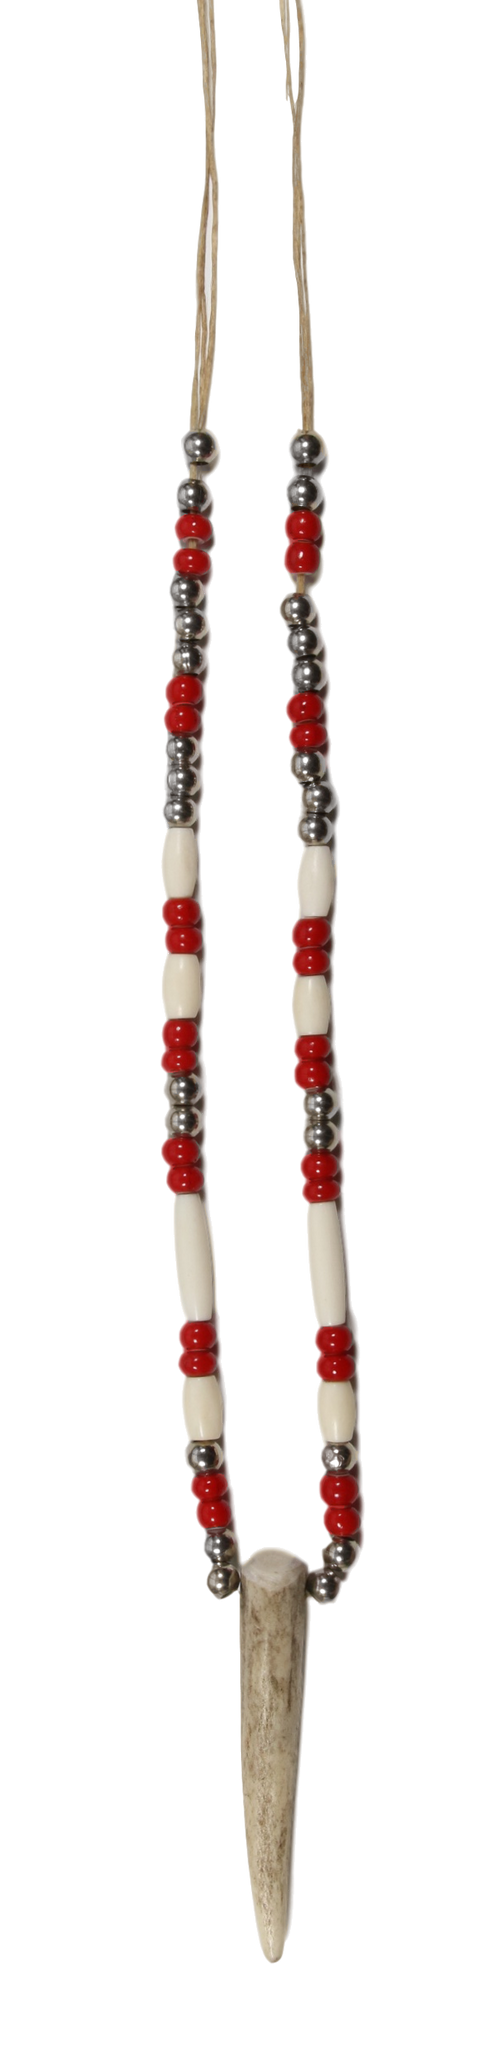 Necklace Deer Antler with Bone and Red Beads